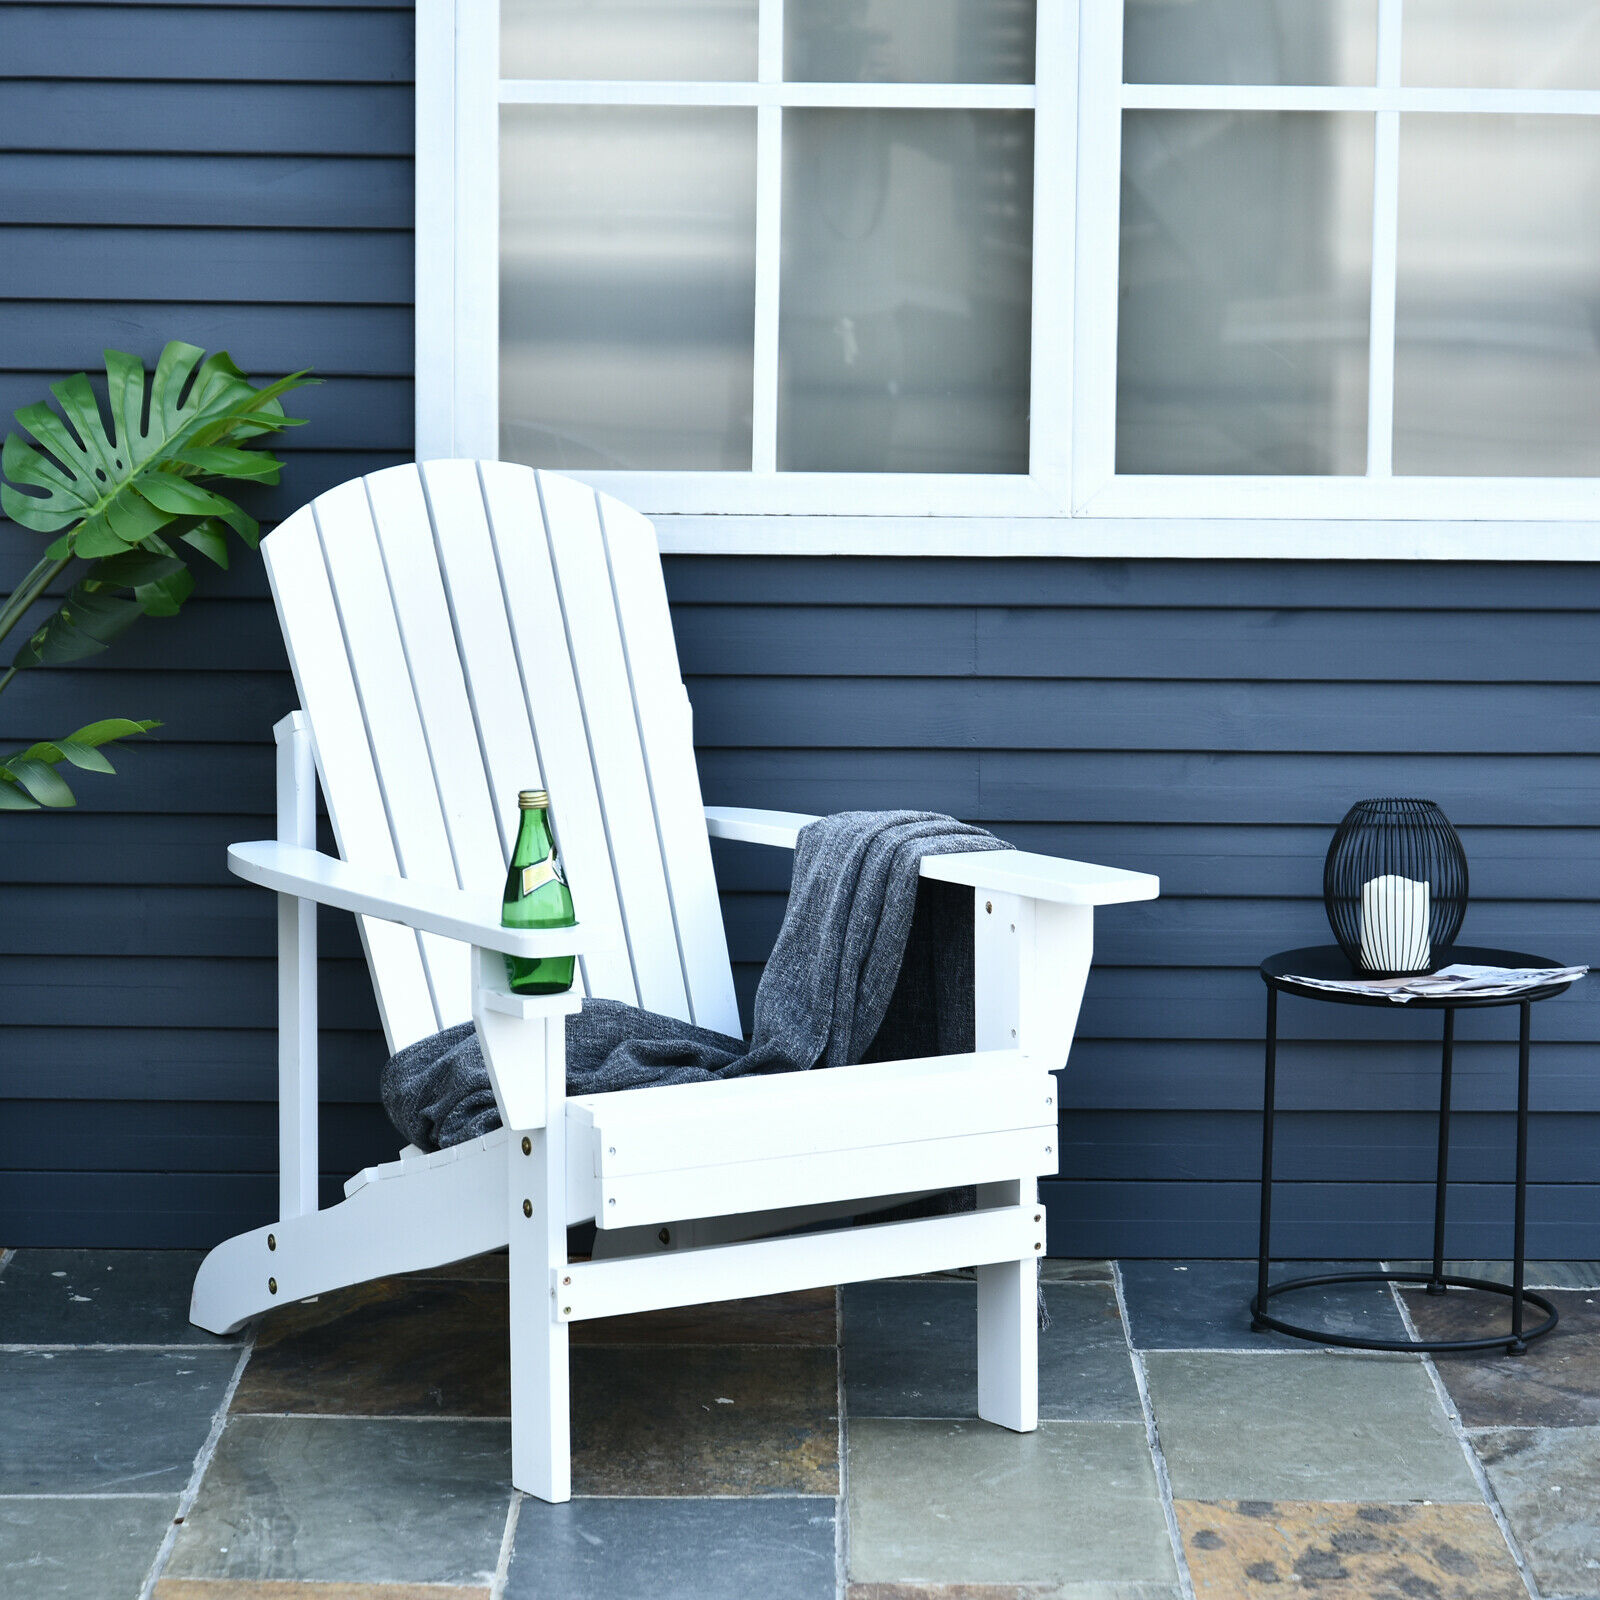 Outdoor Patio Wooden Adirondack Chair Deck Lounge w/ Cup Holder White